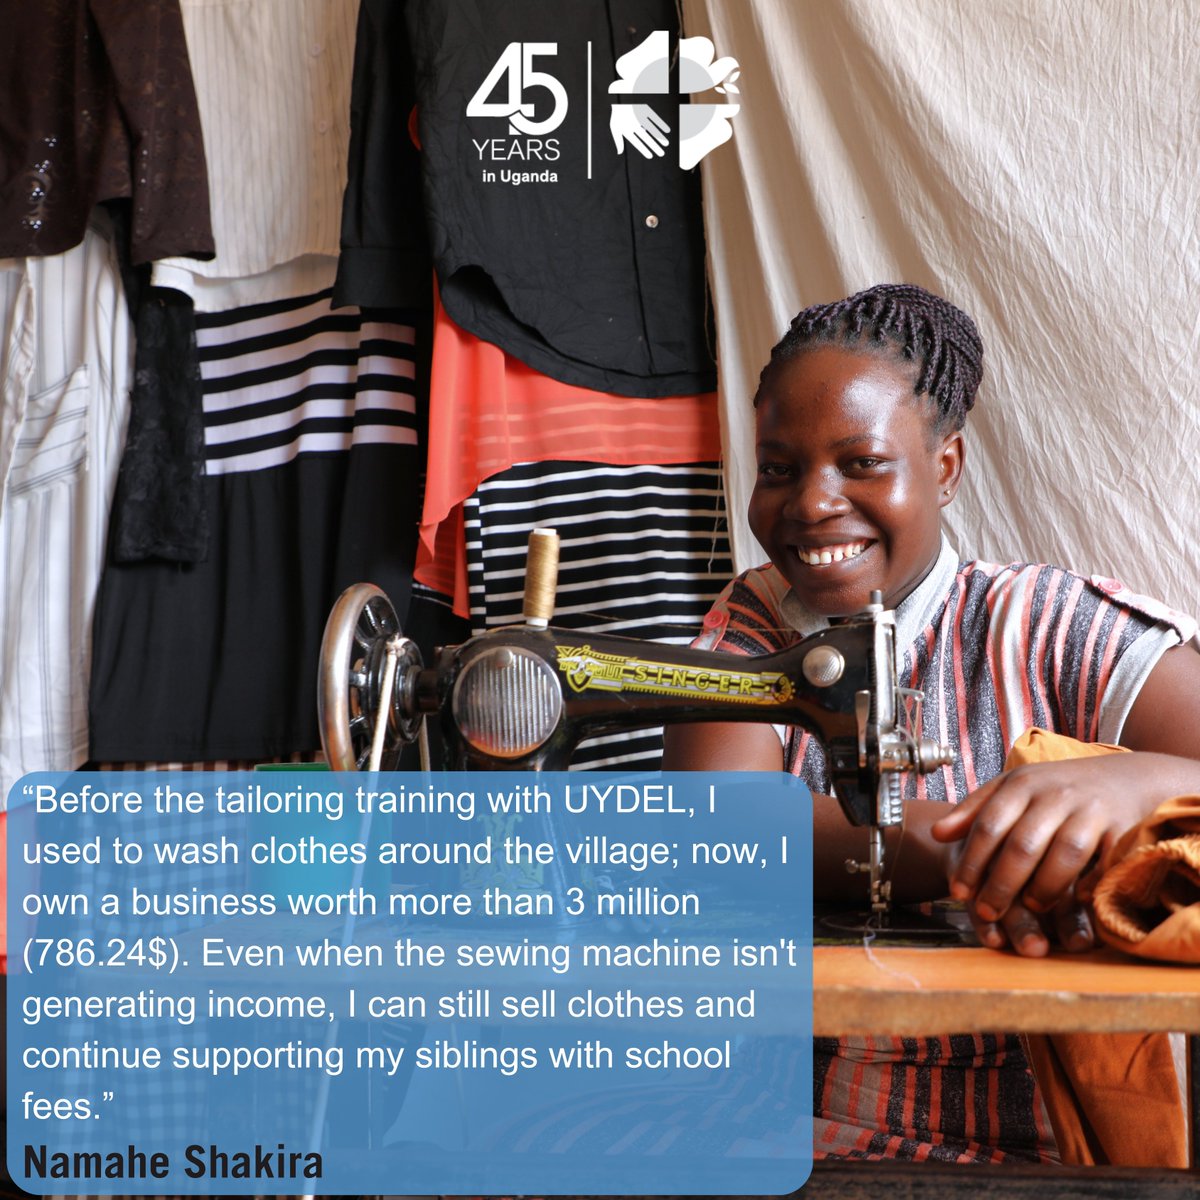 Meet Shakira, just one of the many urban youths in Kampala who has been empowered through vocational skills training. Thanks to our implementing partner @uydel_2019 and the generous funding from the Iceland Church Aid, Shakira is now able to support her family. #YouthEmpowerment